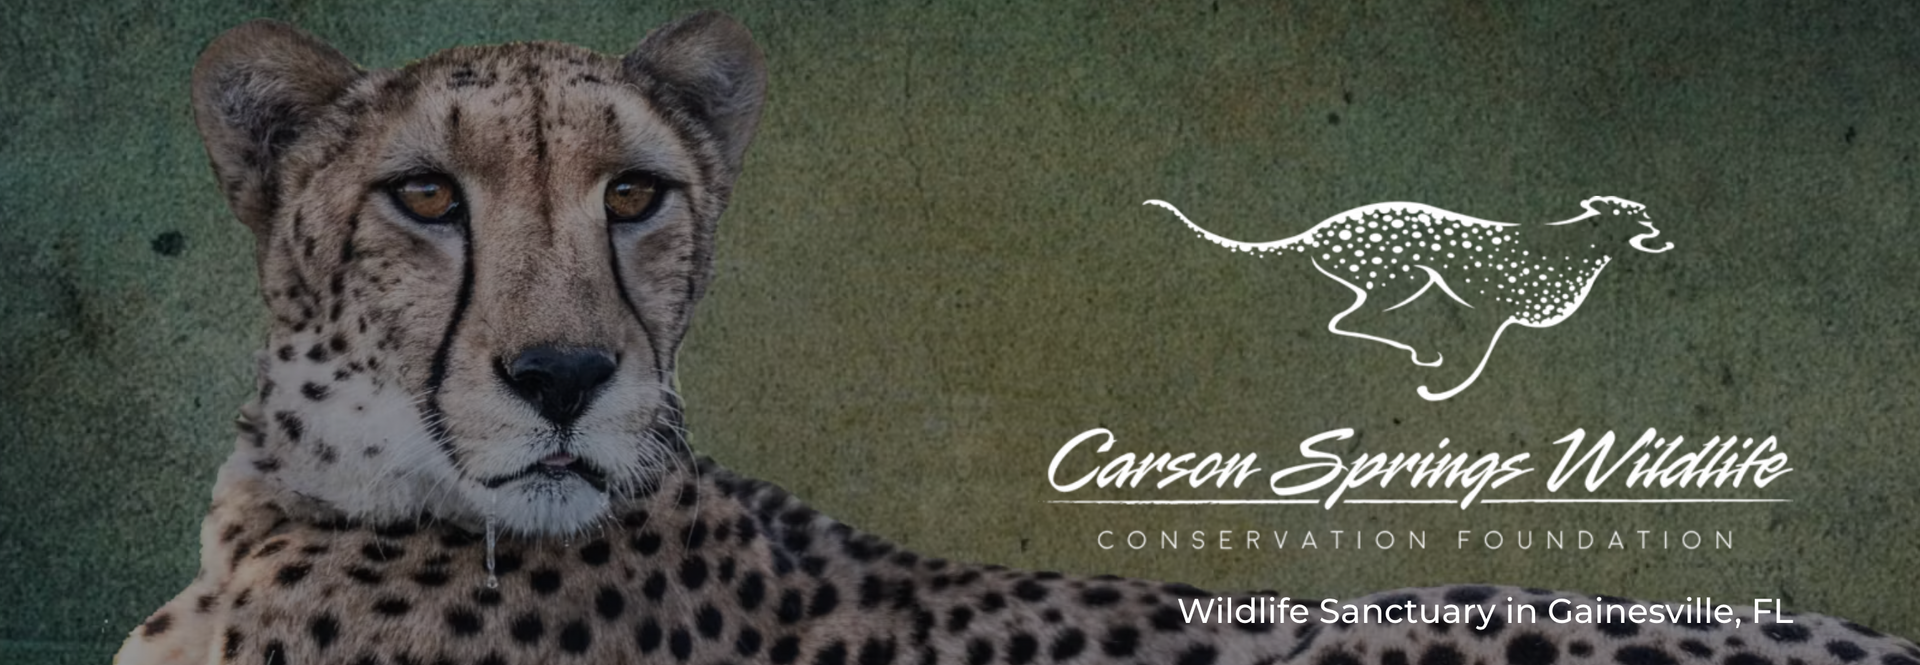 Cheetah from Carson Springs Wildlife Conservation Foundation